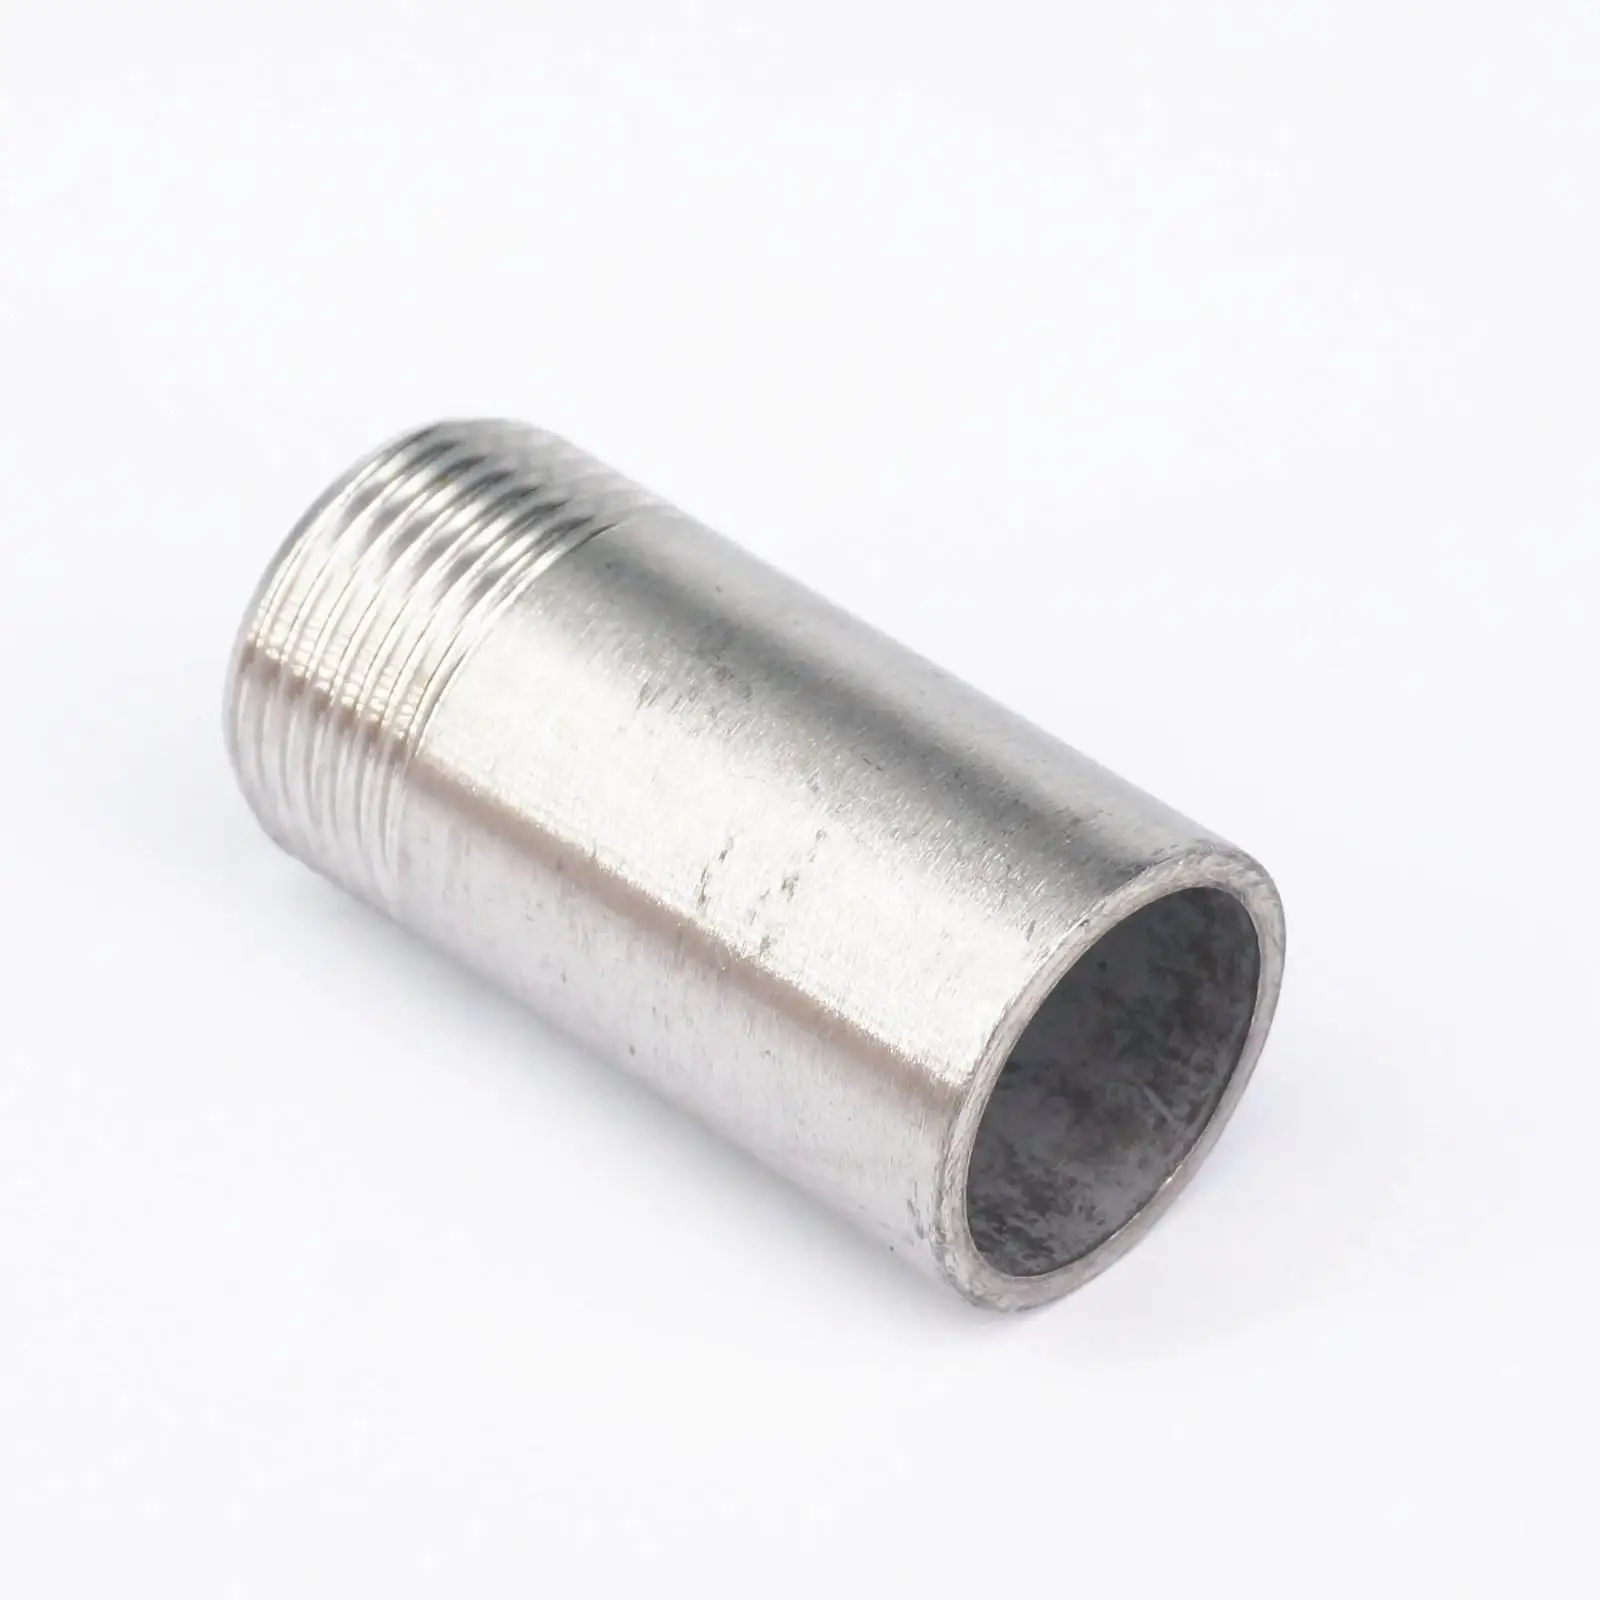 LOT2 1/4"-2" BSP Male Length 50mm 304 Stainless Pipe Fitting Weld Connector 